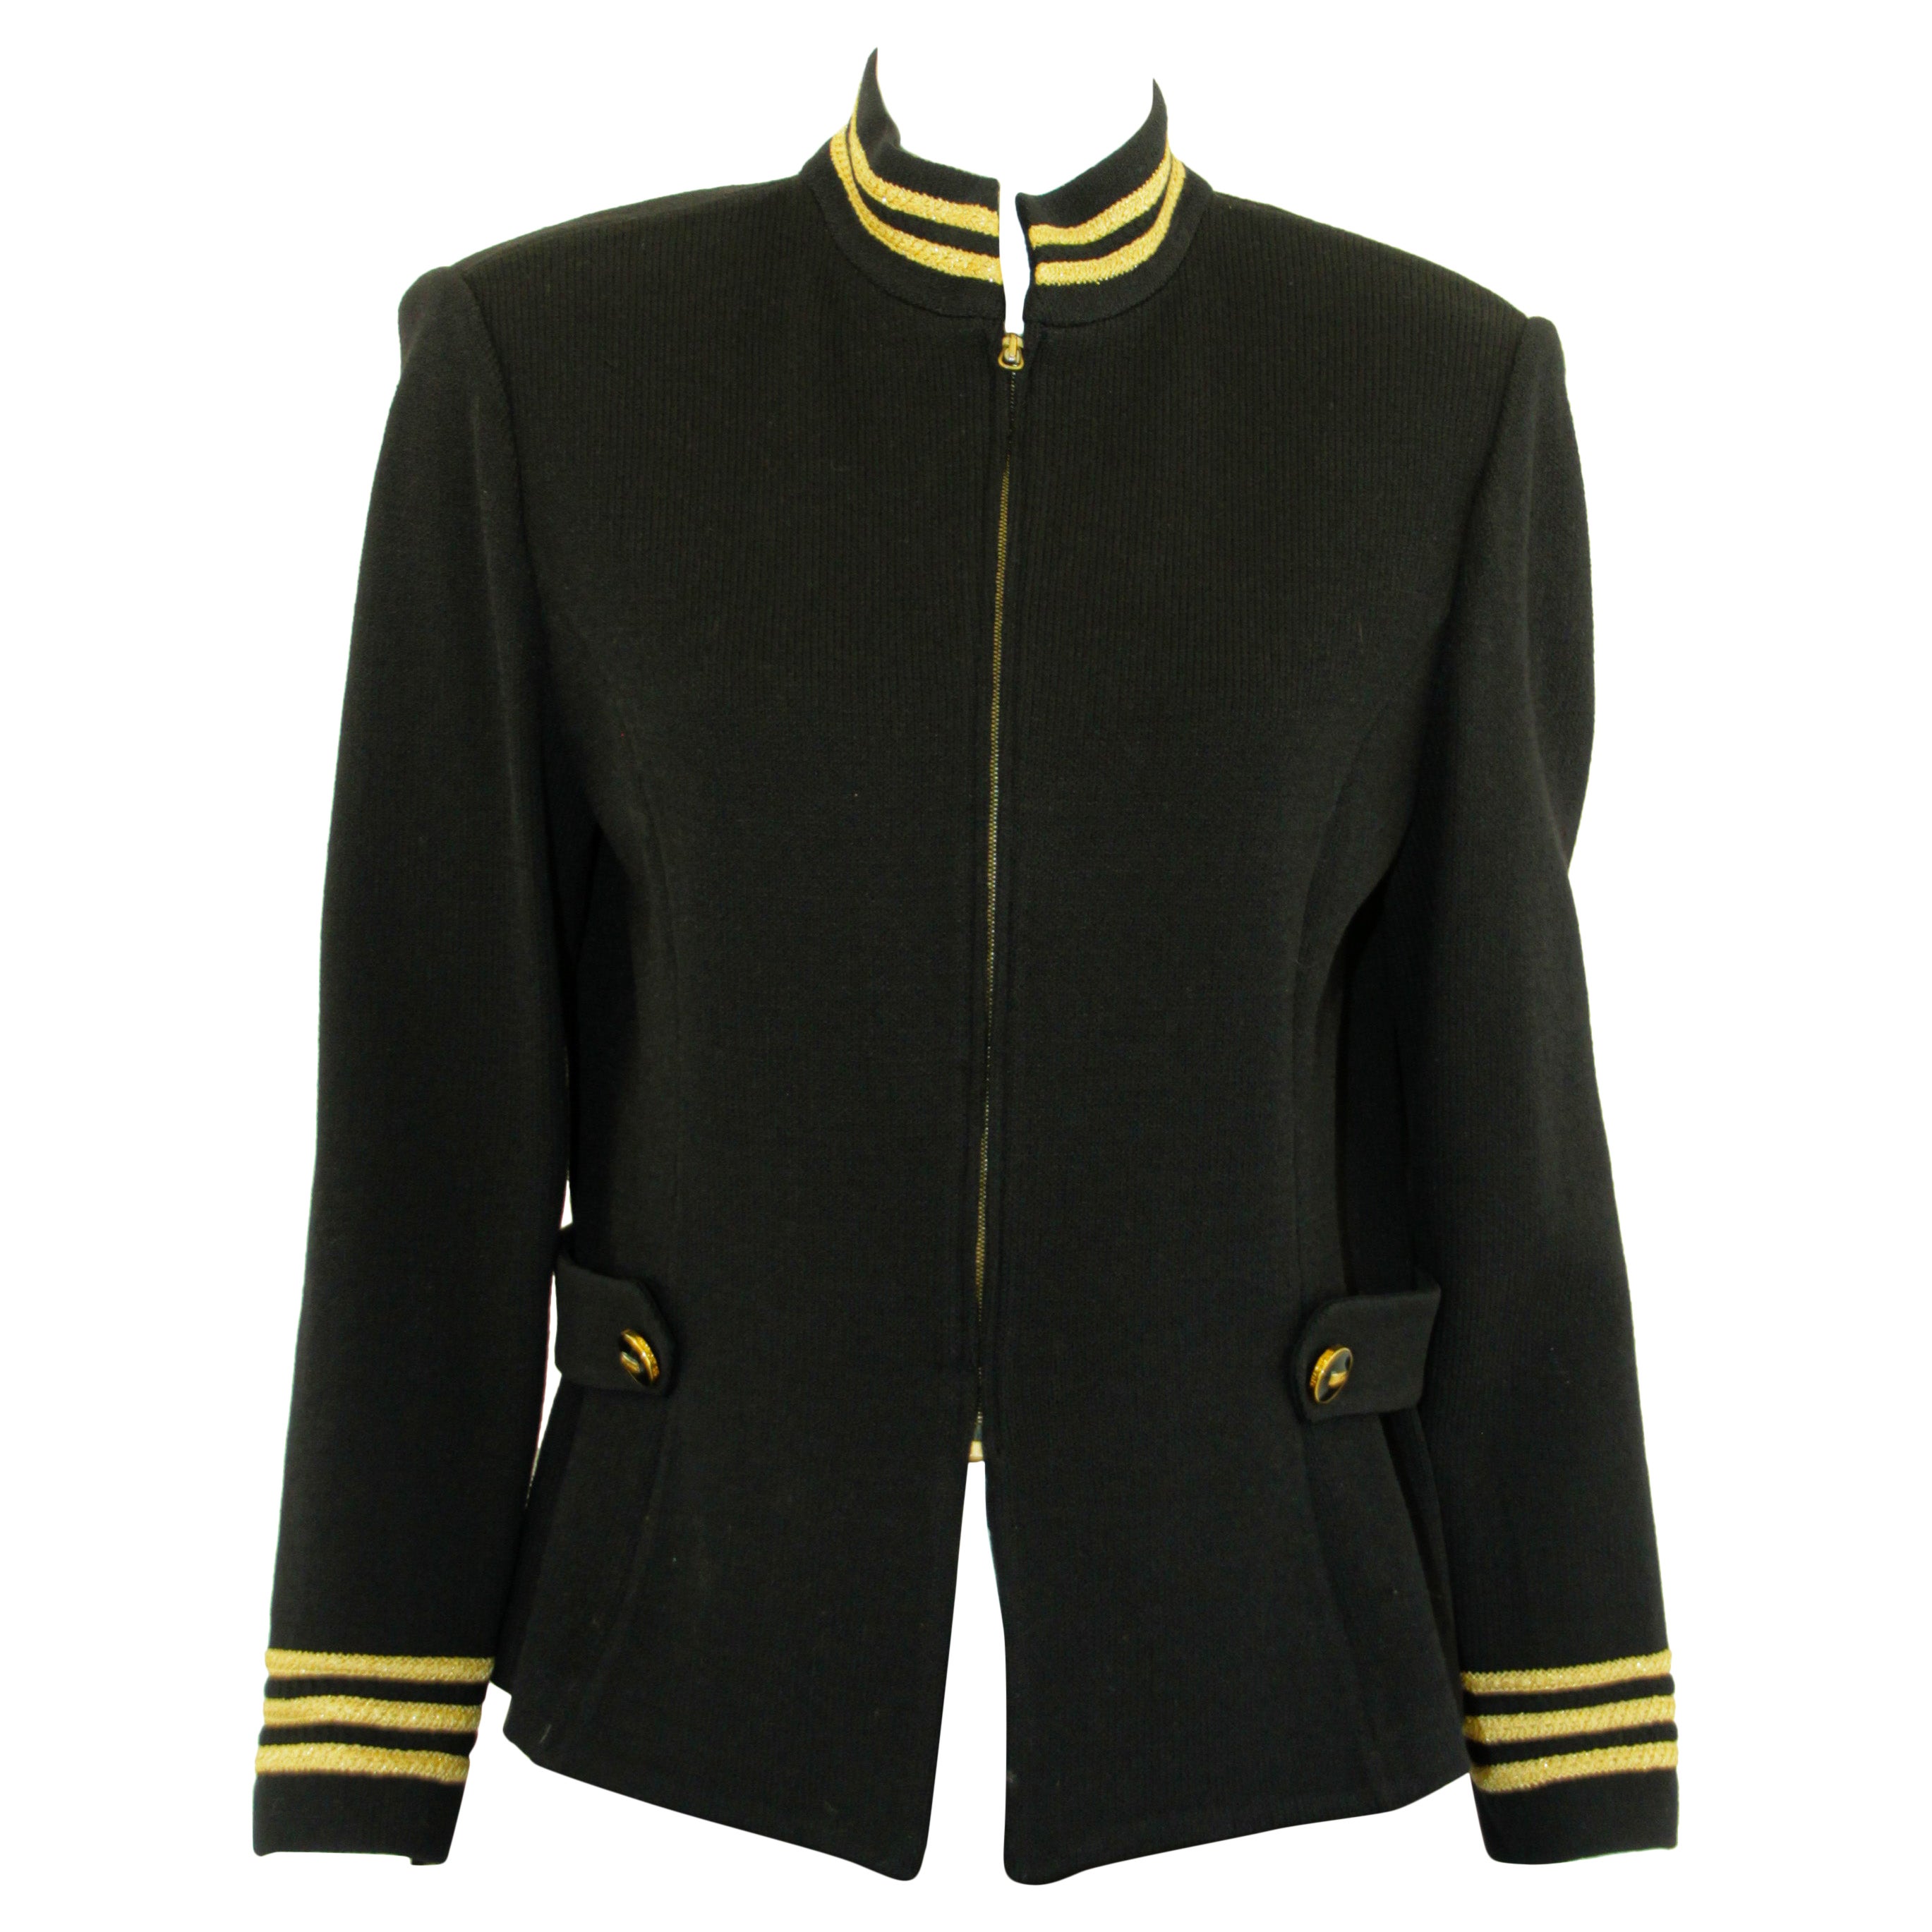 St. John Military Blazer Knit Jacket 1990's Black and Gold For Sale